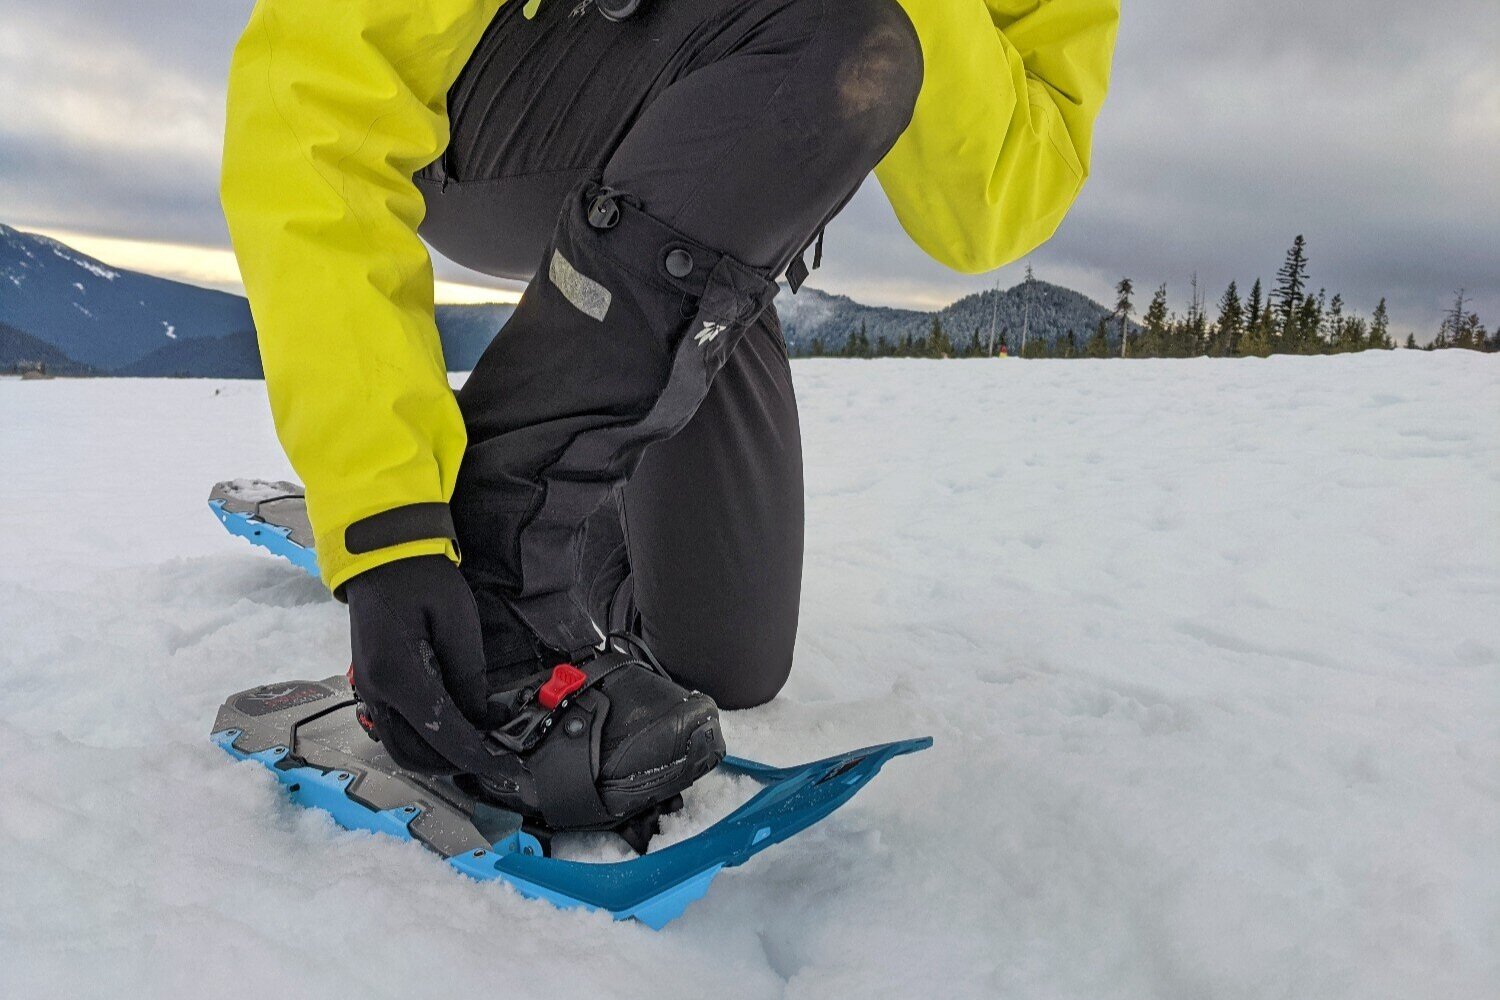 The bindings of the MSR Revo Explore are easy to adjust - even with gloves on.